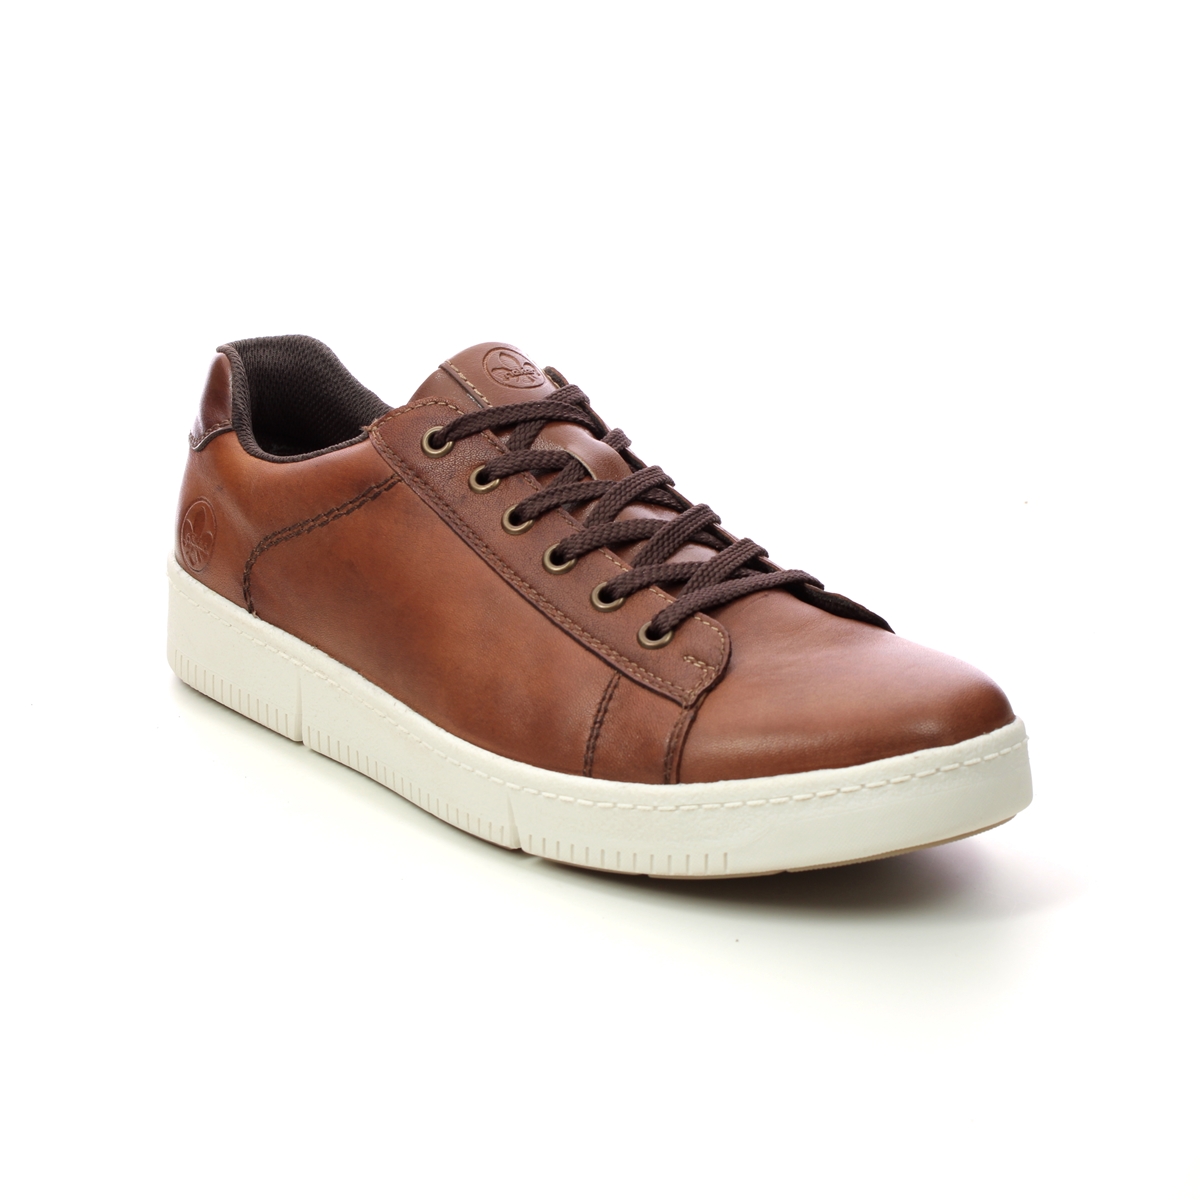 Rieker Seven Soft Tan Leather Mens Trainers B7120-24 In Size 41 In Plain Tan Leather